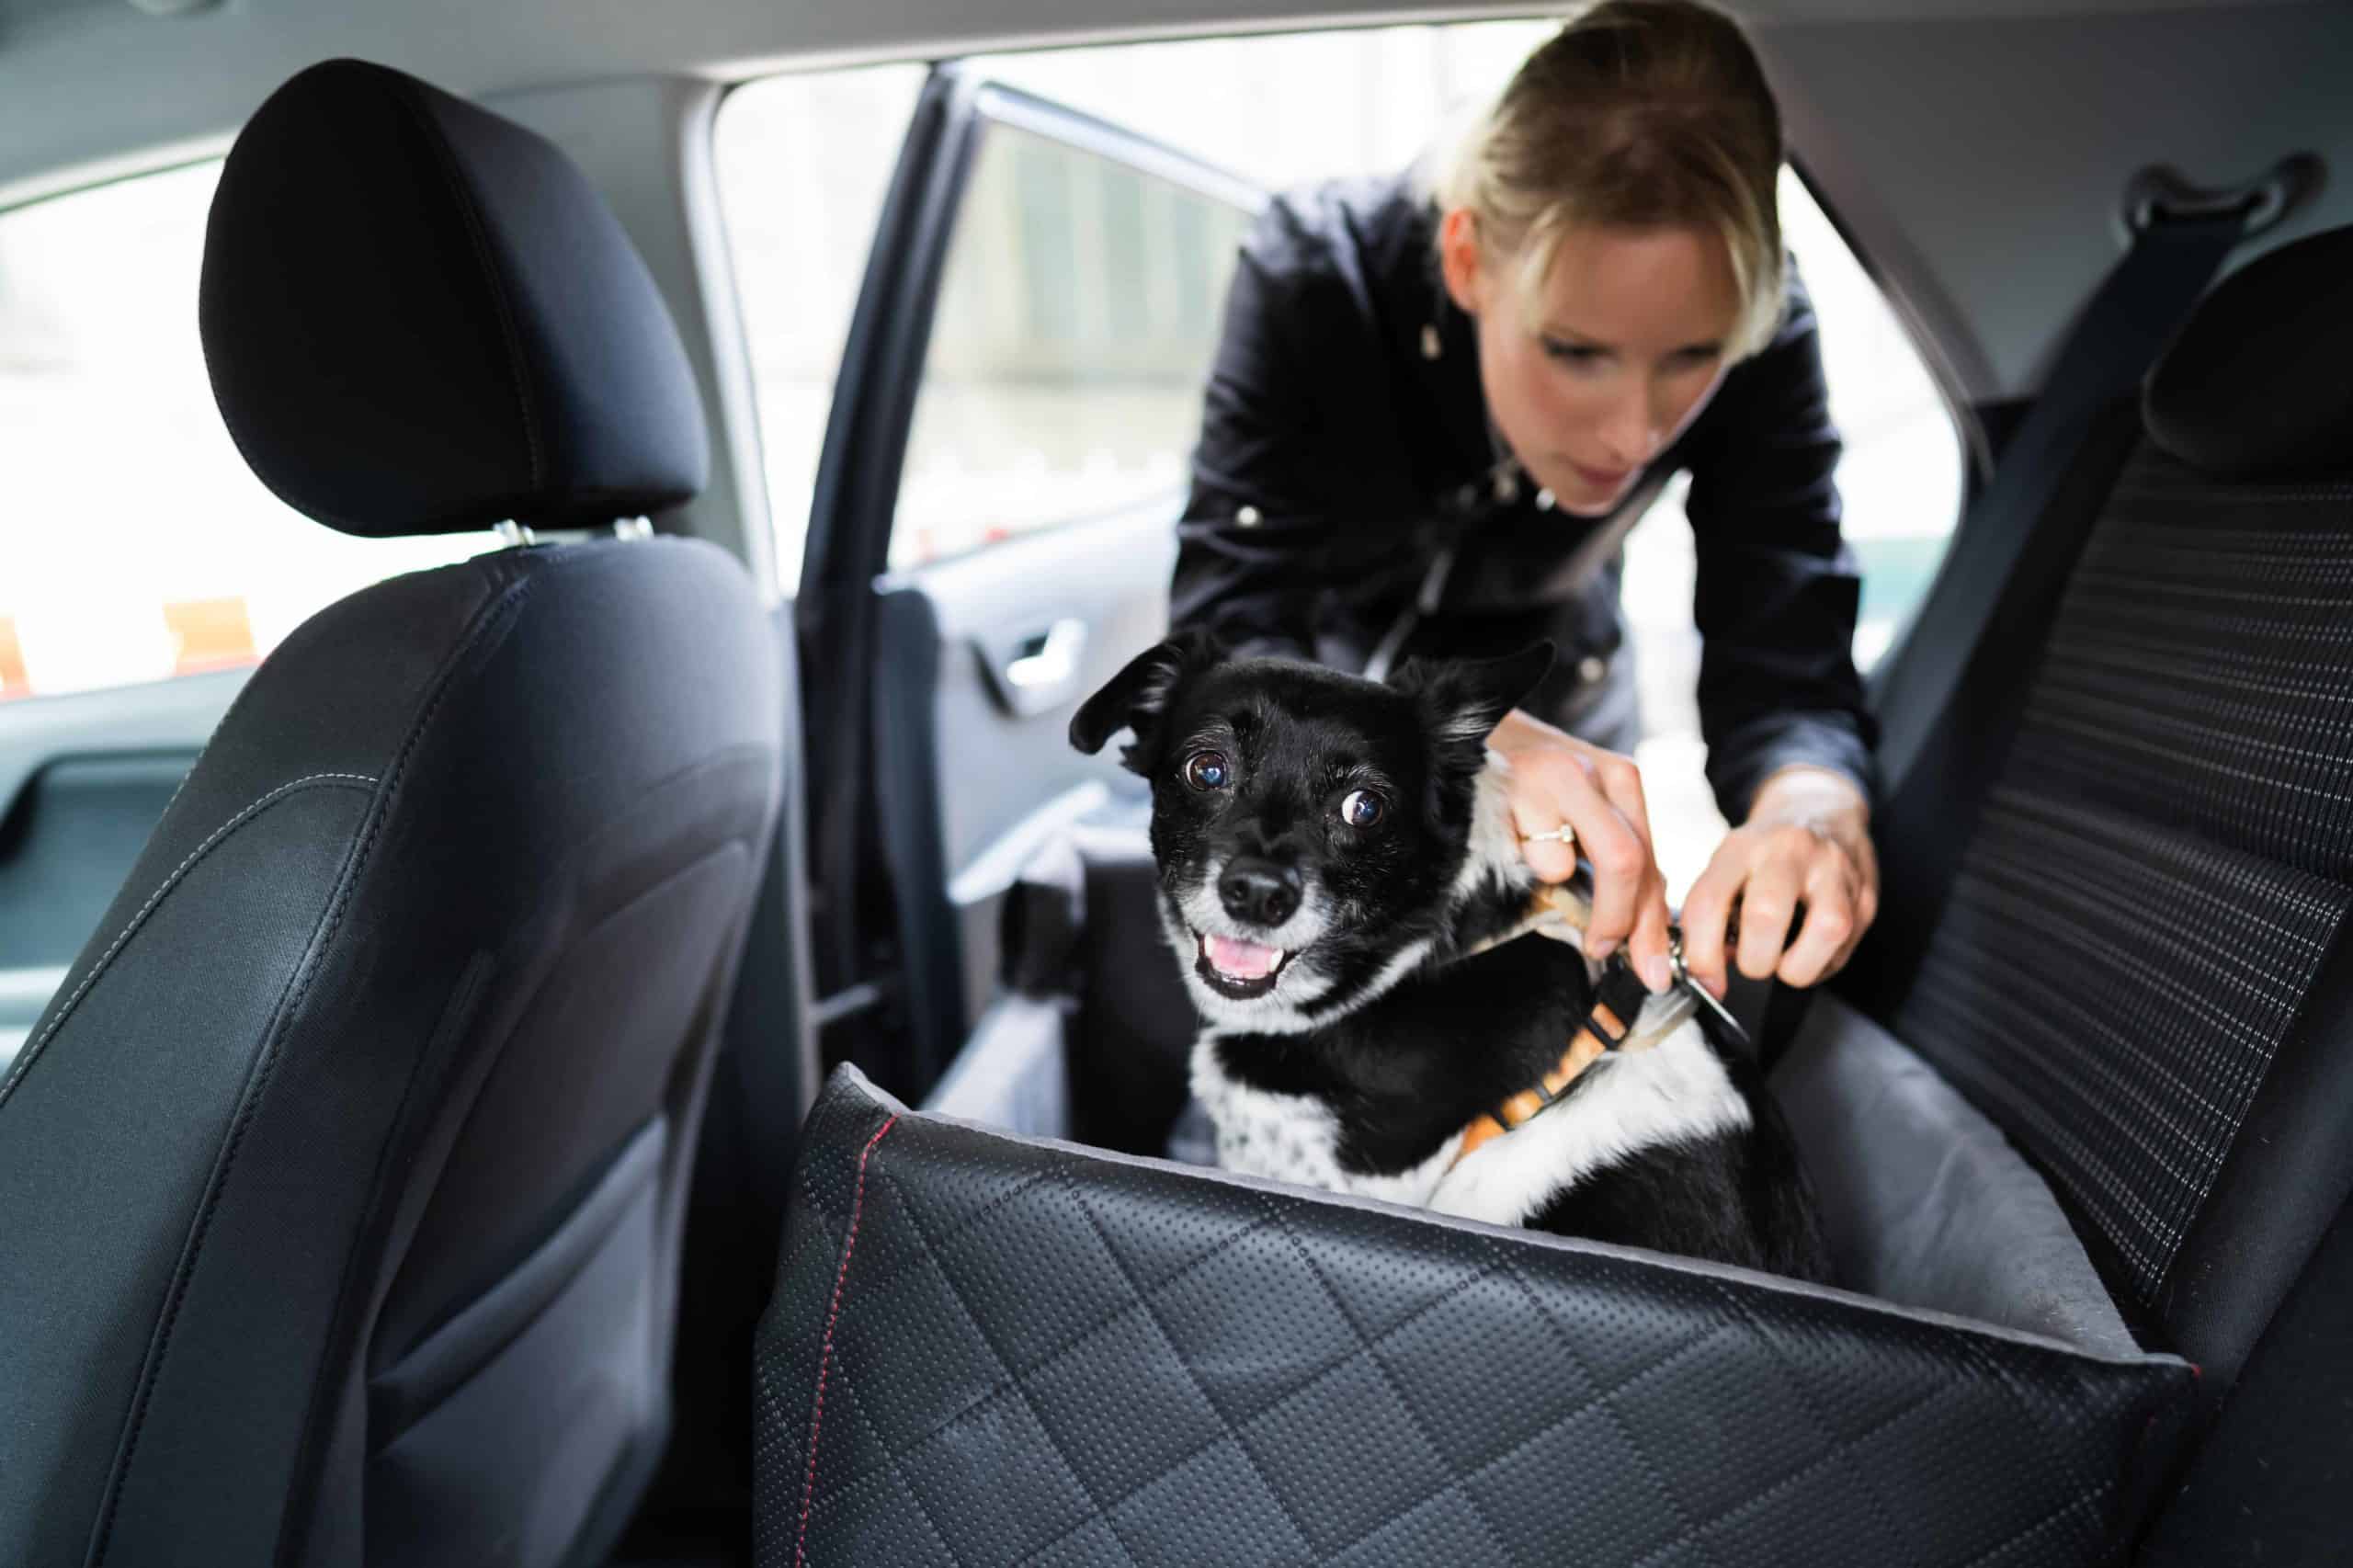 Woman hooks dog into backseat box. Keep your travel companion safe on your next trip. Clean out your car, secure your dog, prevent motion sickness, and bring an extra leash.